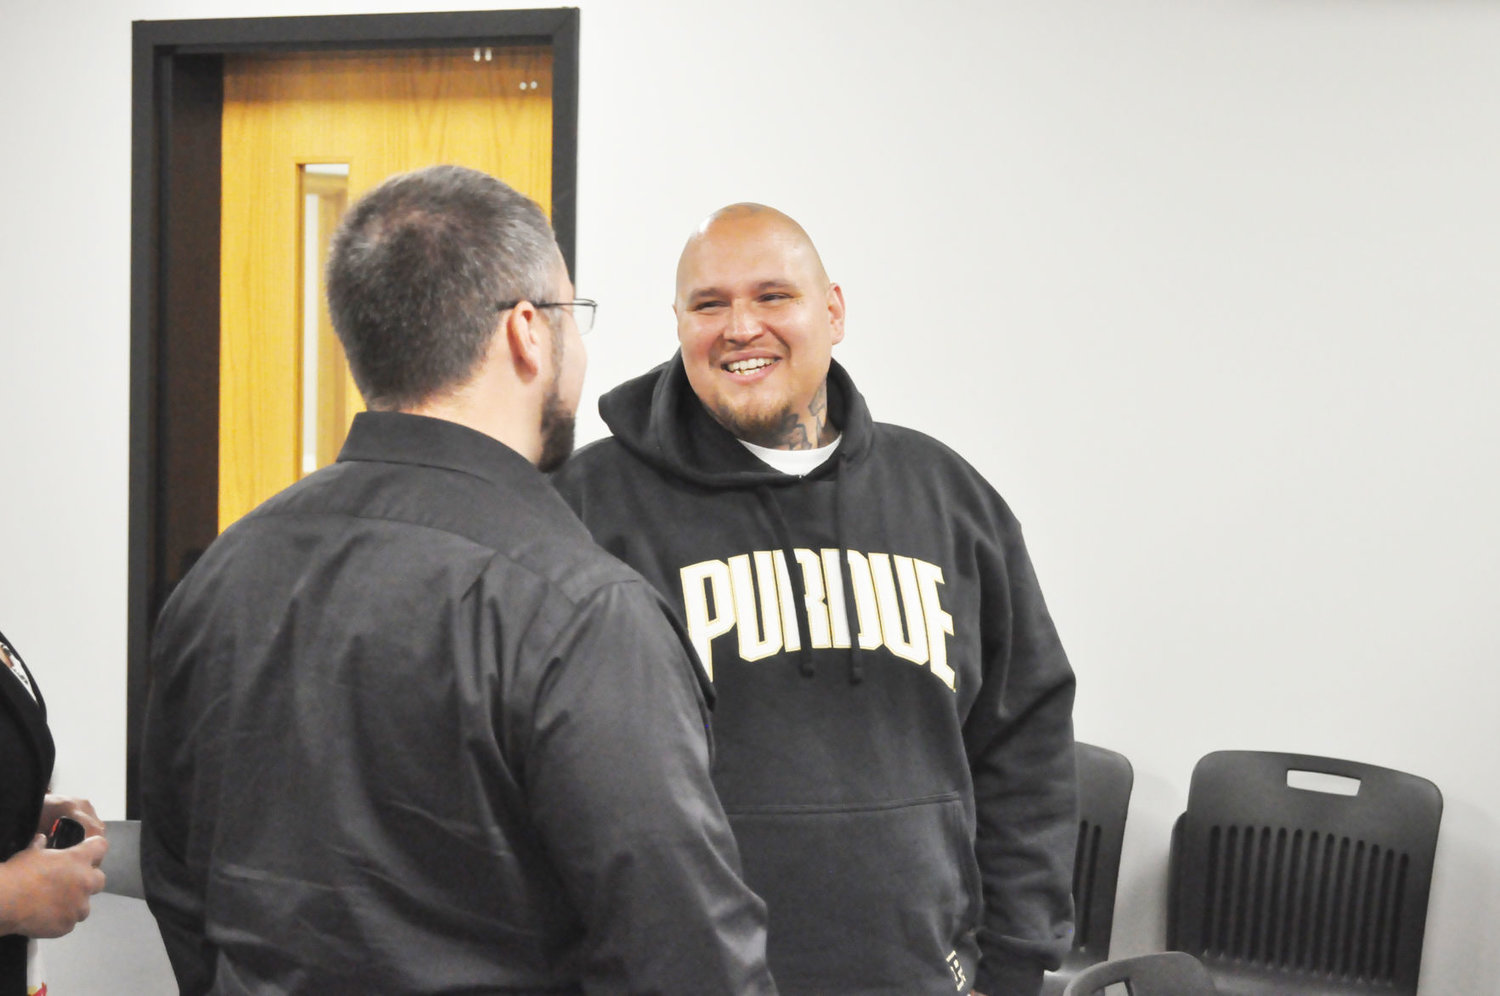 Josh Sanchez, right, speaks with Jared Walker of Through the Gate Tuesday at the Montgomery County Drug Free Coalition Red Ribbon Breakfast. Sanchez is a graduate of the Jail Chemical Addiction Program.